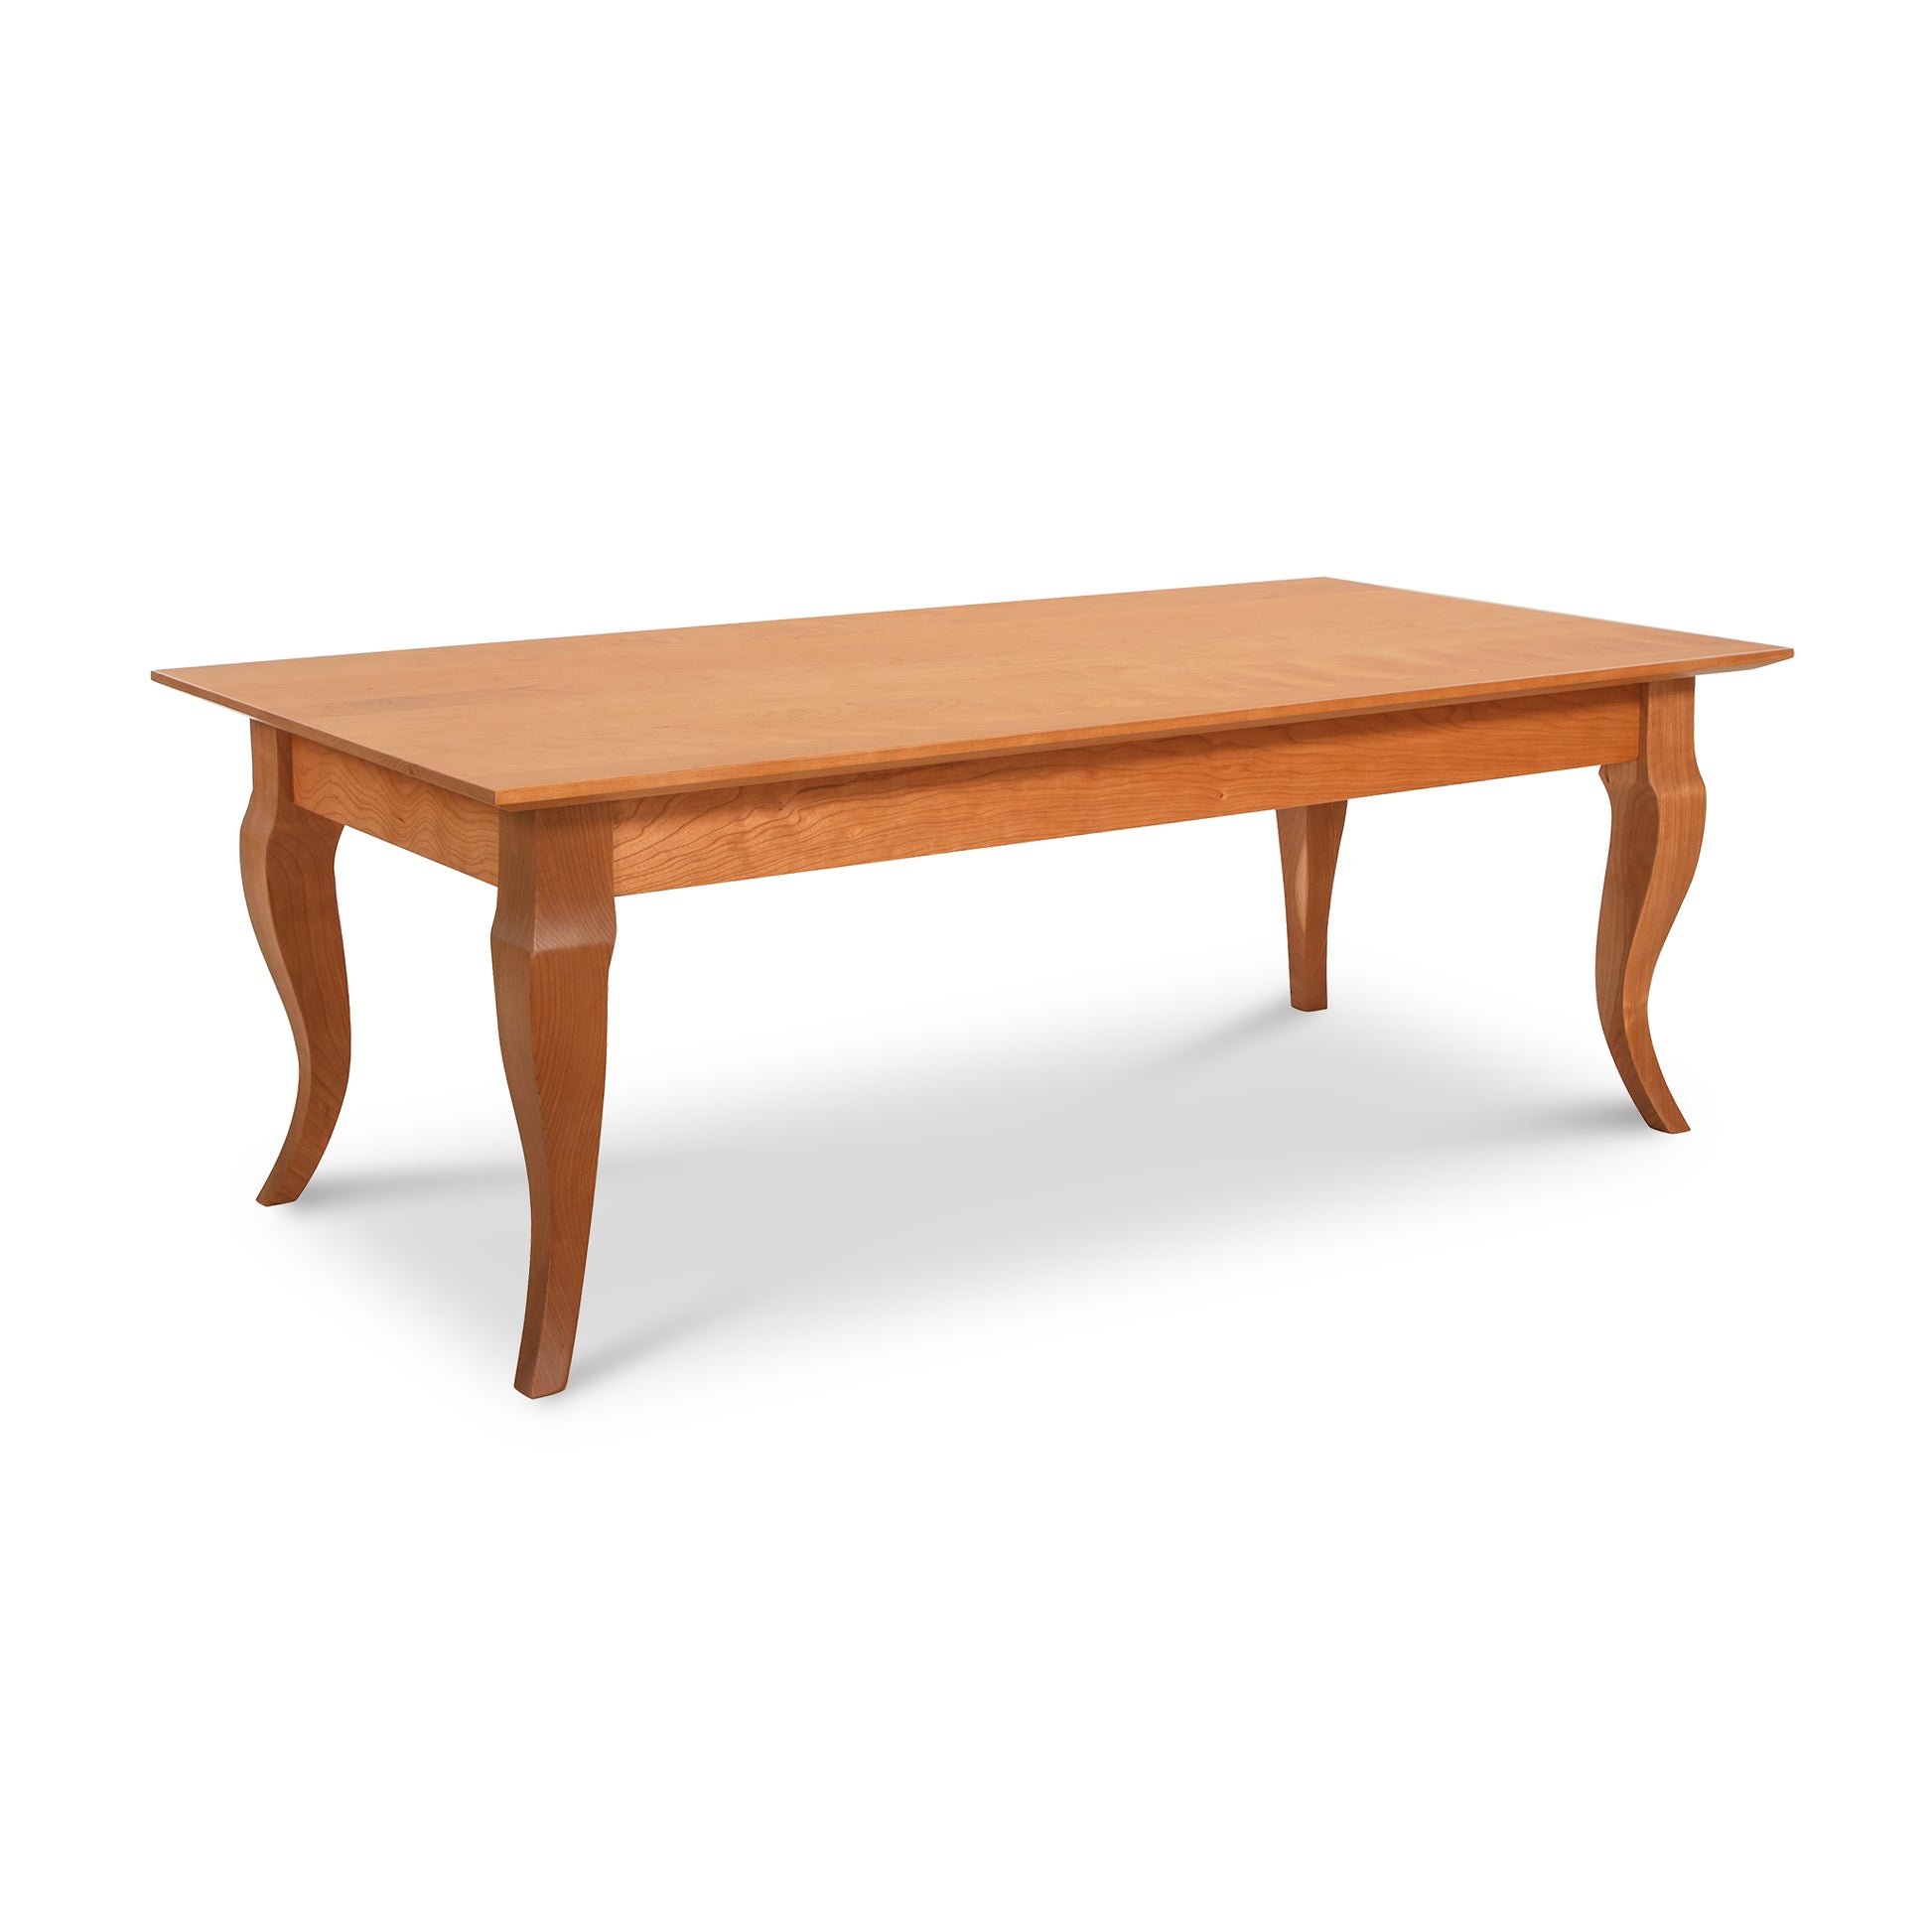 A Lyndon Furniture French Country Coffee Table with a solid wood top and legs.